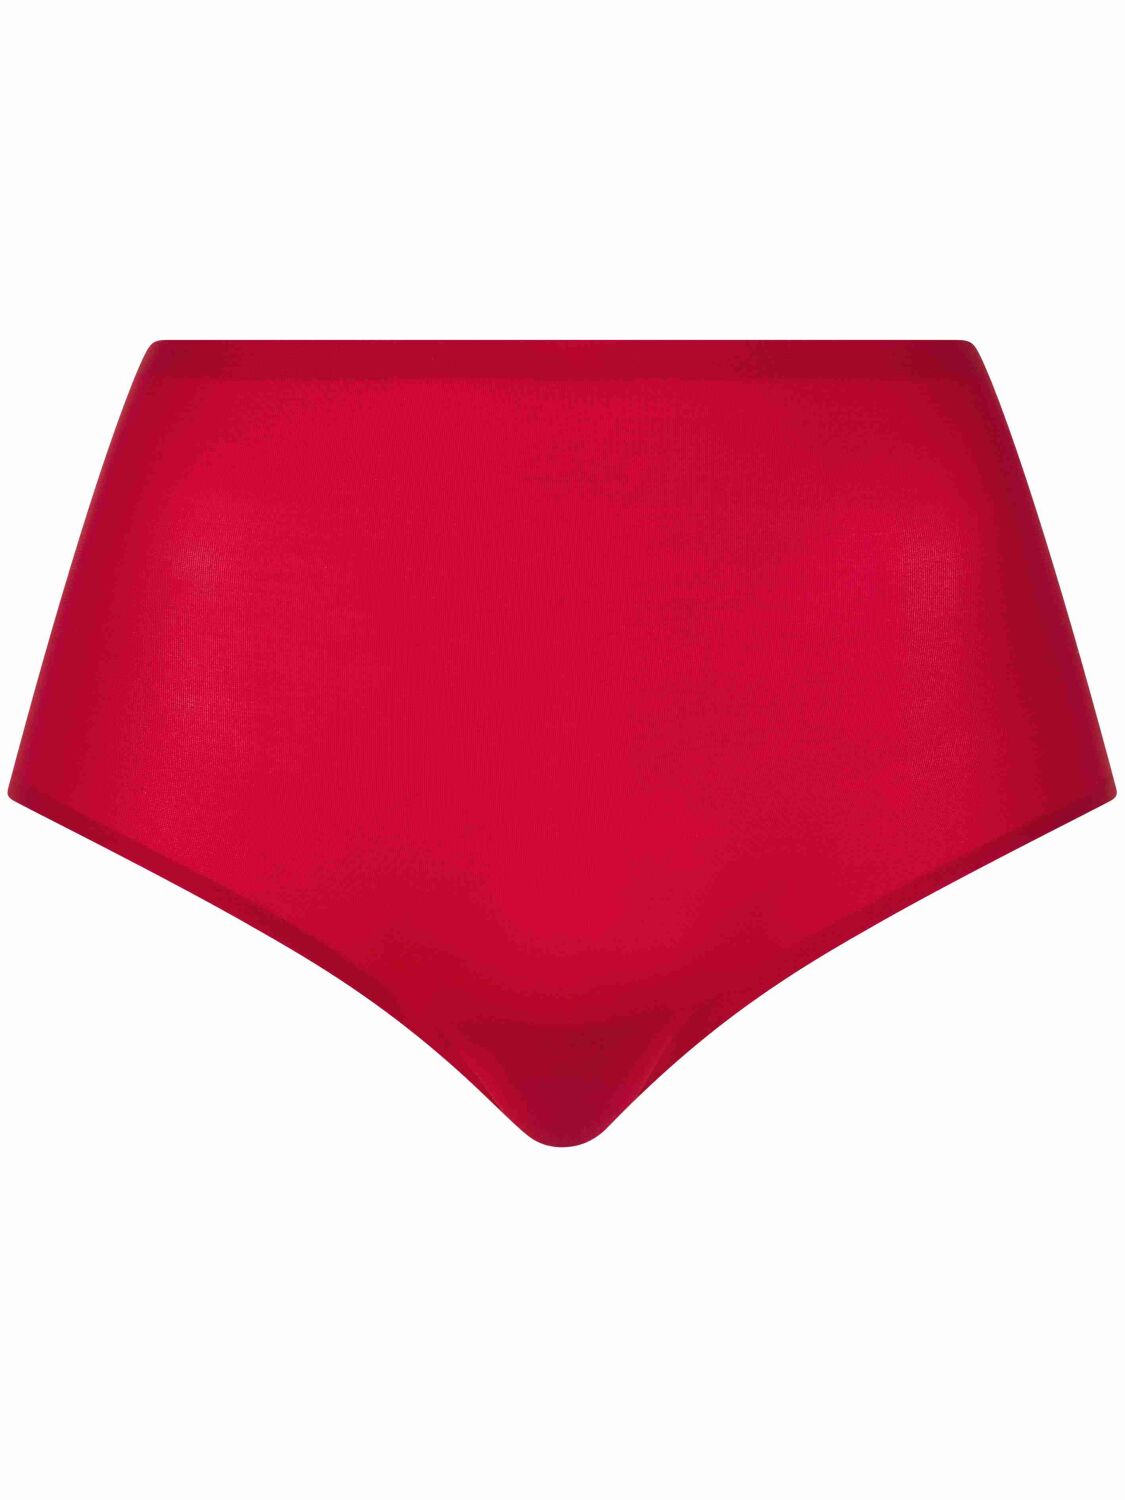 Chantelle Taillenslip ONE SIZE SoftStretch Farbe Passion Red